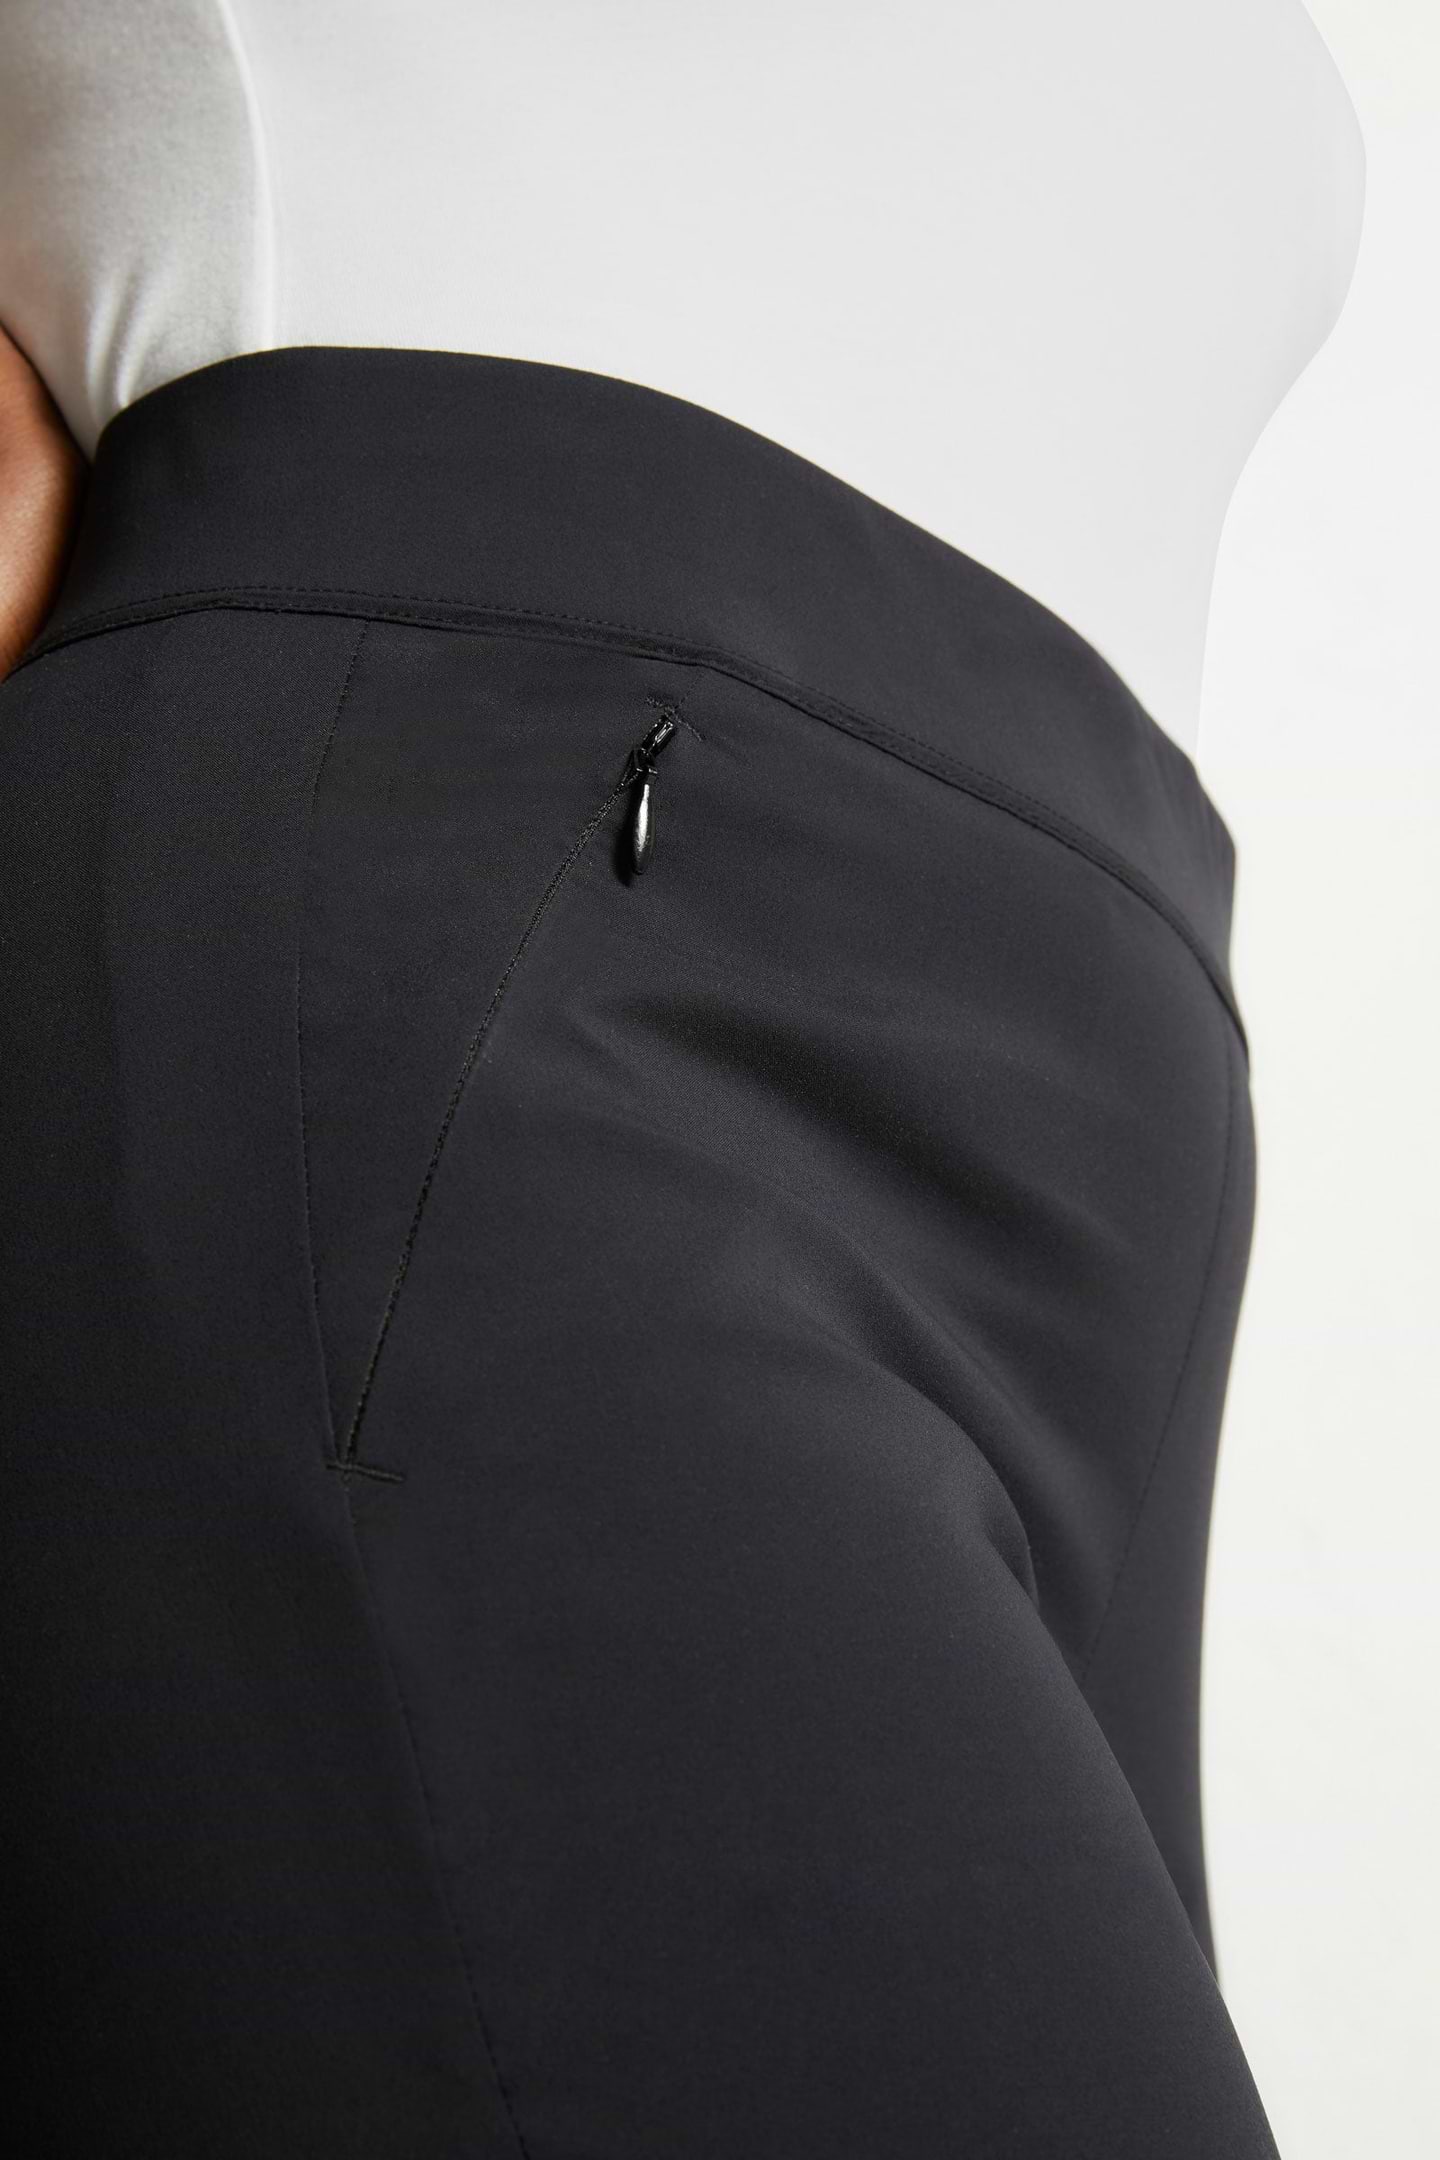 The Best Travel Pants. Front Zipper Pocket of the Jamie Lee Pull-on Pant in Black